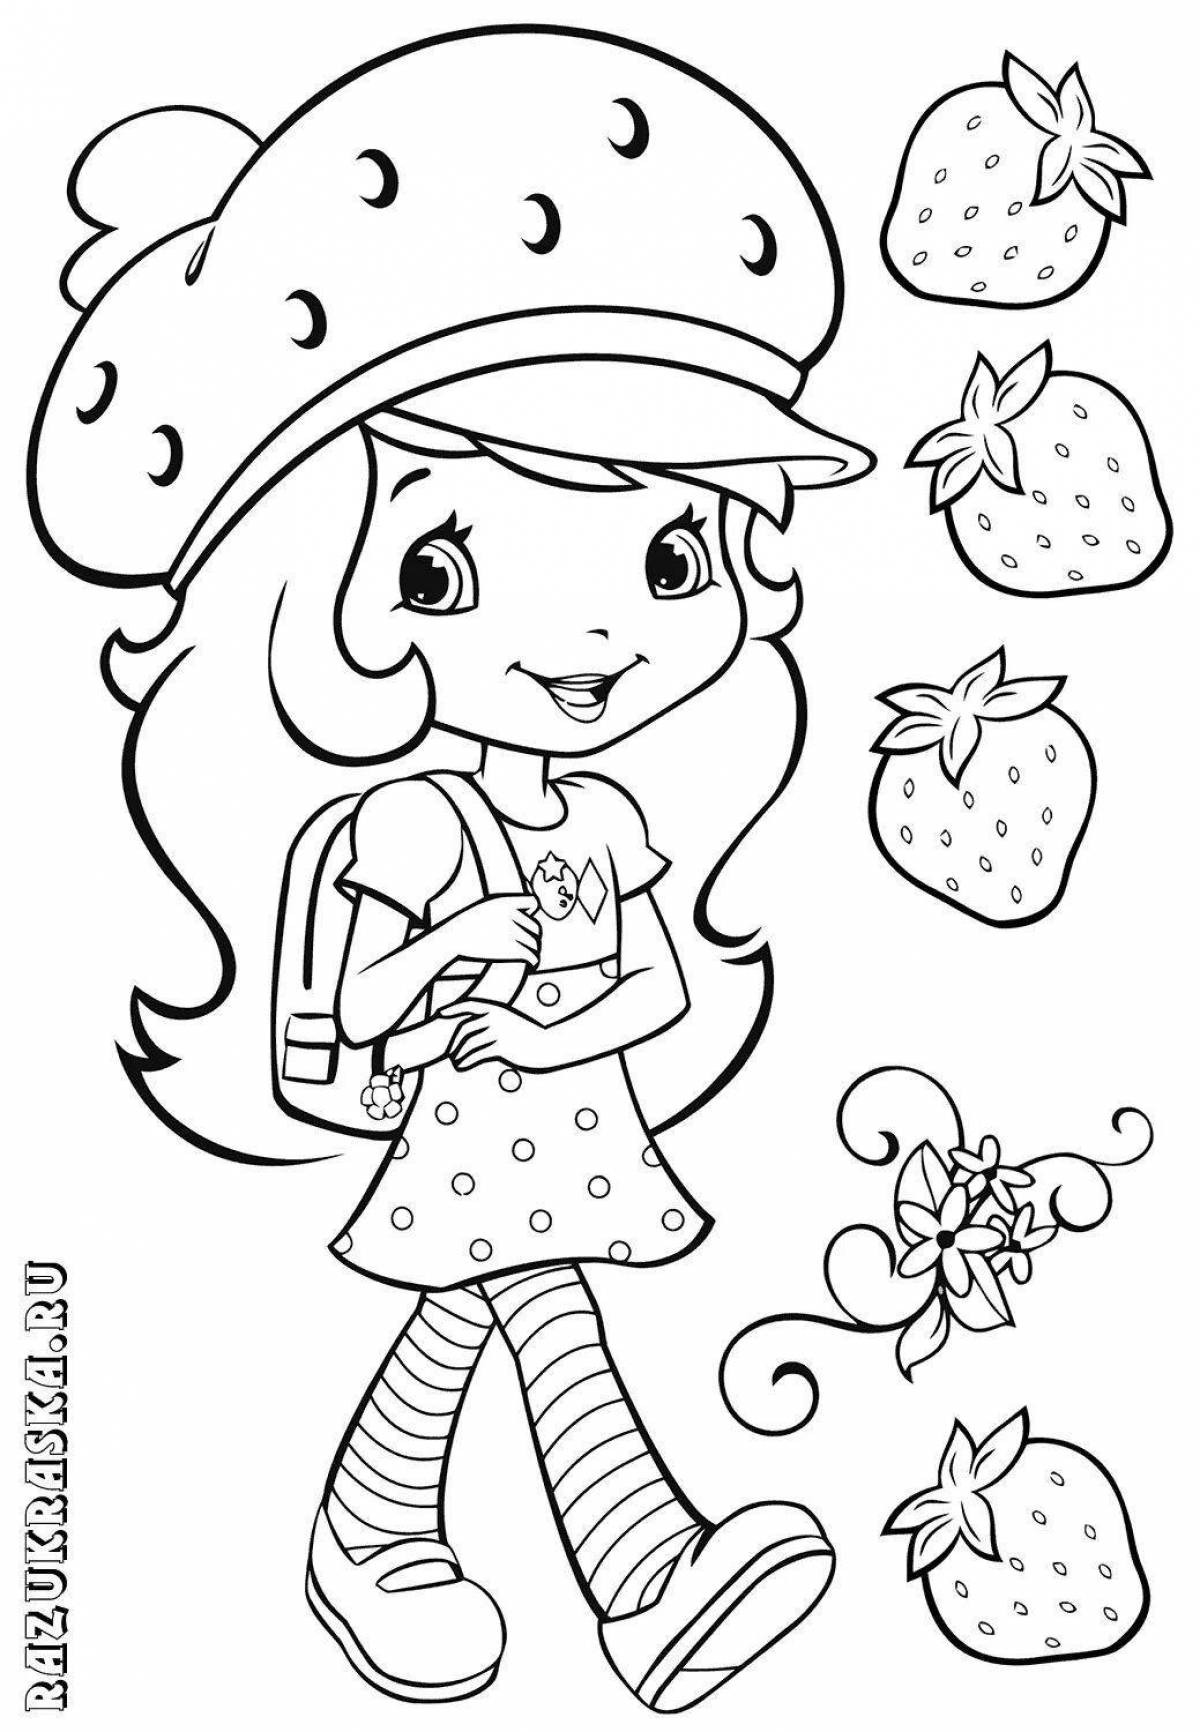 Great strawberry coloring book for kids